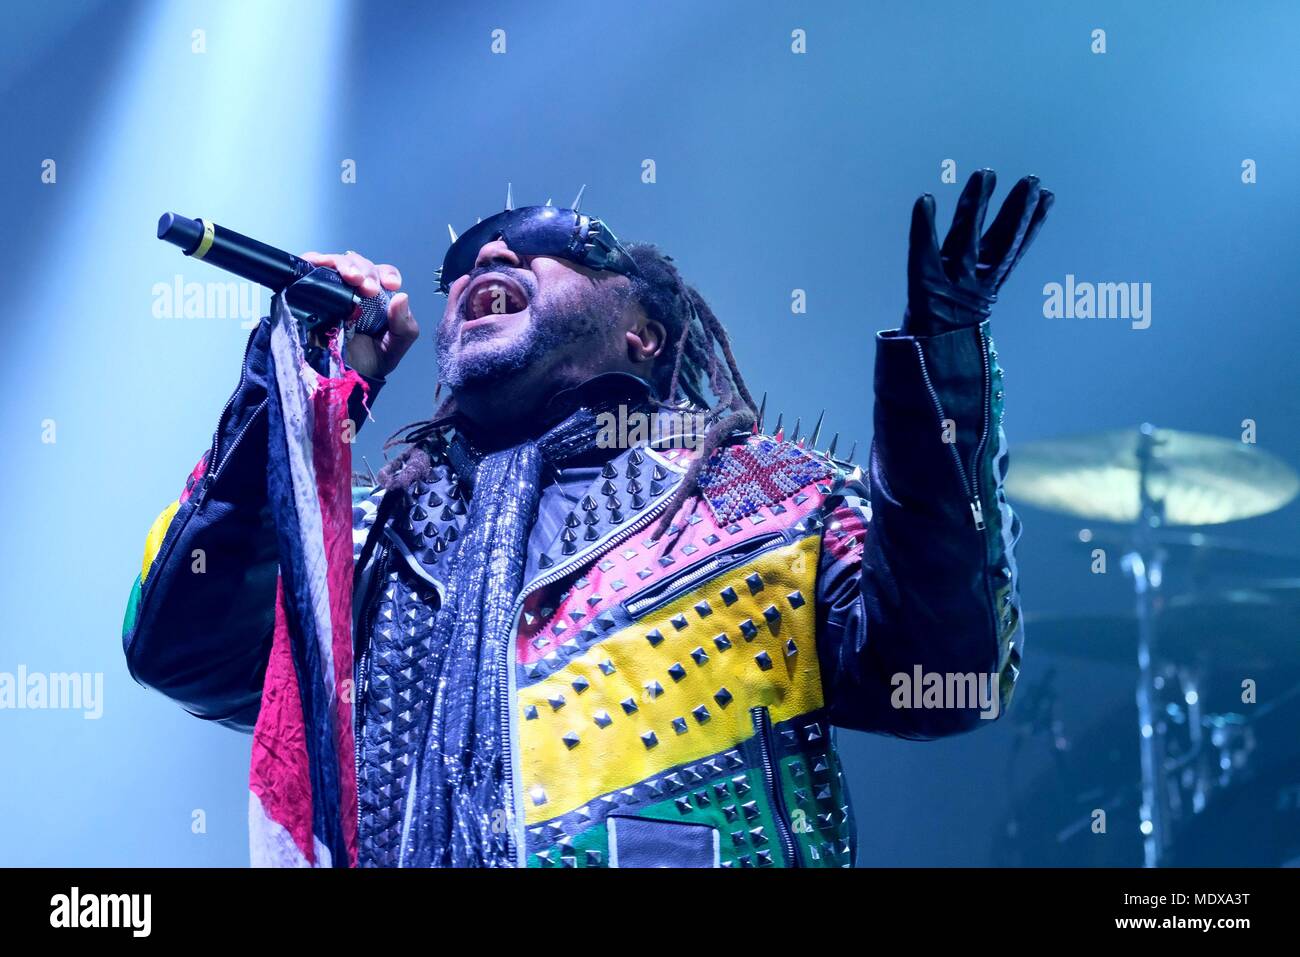 Southampton, Hampshire, UK. 20th  April 2018. O2 - Vocalist Benji Webbe with British band Skindred performing at the O2, Southampton 20th April 2018, UK Credit: Dawn Fletcher-Park/Alamy Live News Stock Photo